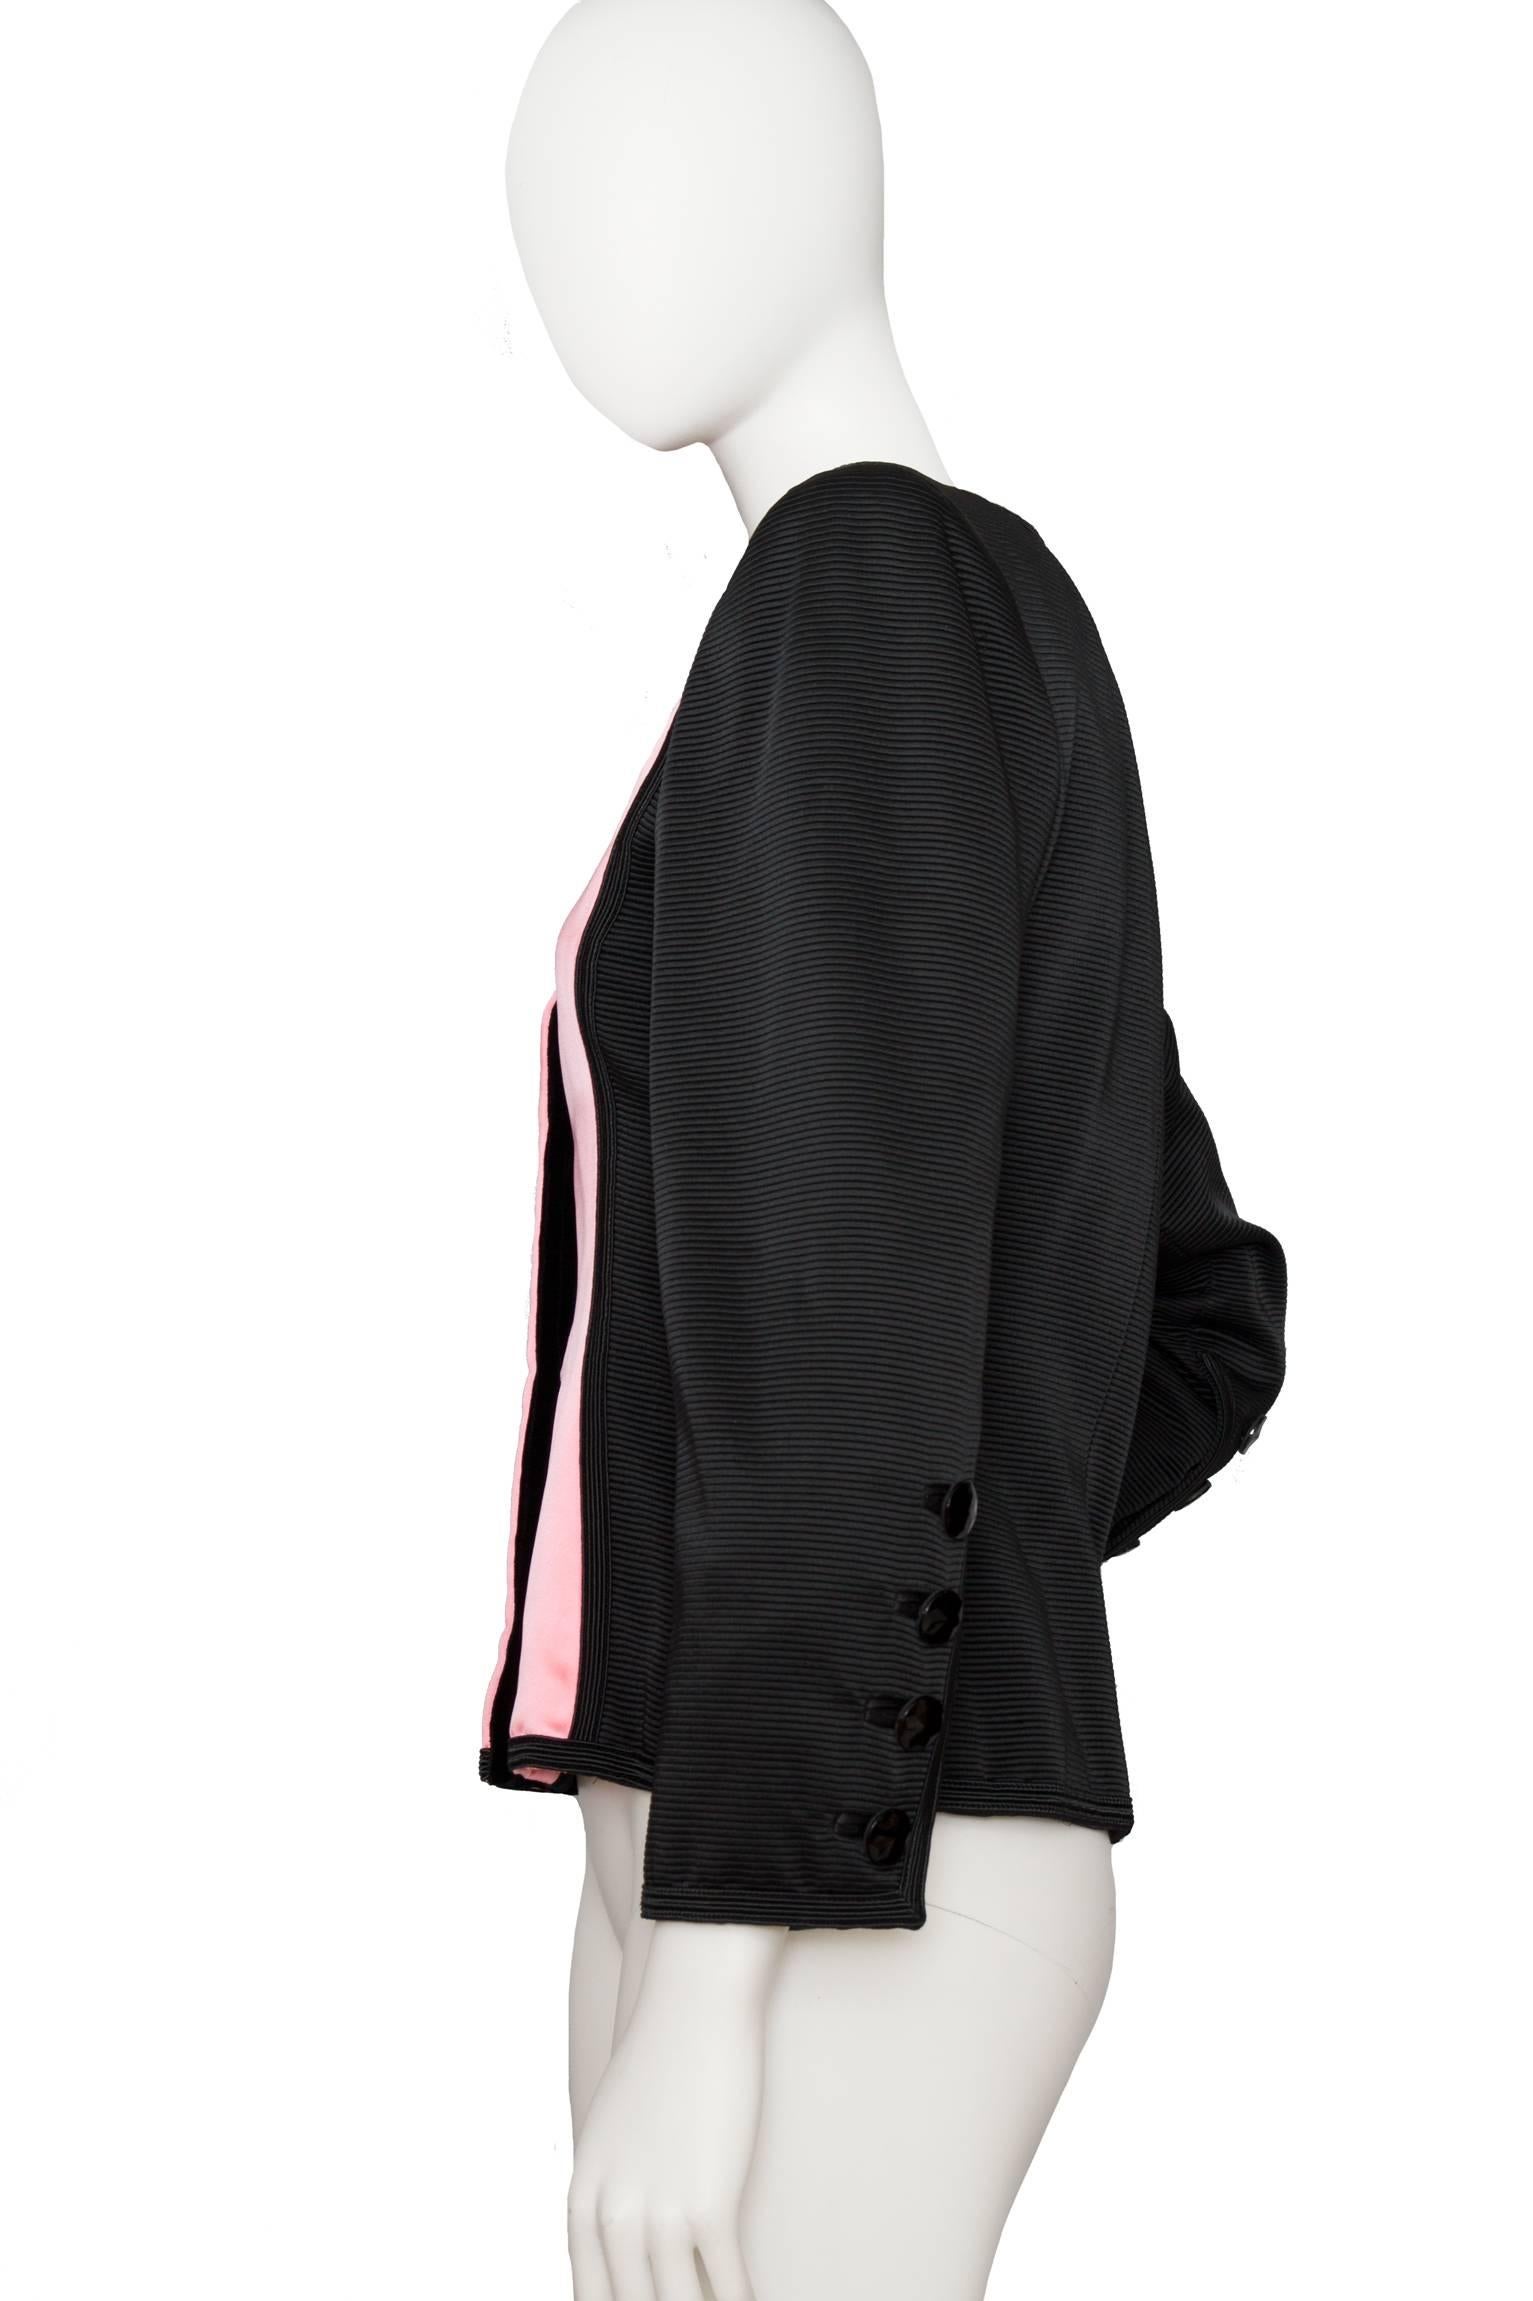 An incredible iconic vintage Yves Saint Laurent Rive Gauche pink and black blazer with long tapered sleeves with four faceted buttons at the cuff. The blazer consists of a solid light pink panel at the front providing a delicate contrast to the